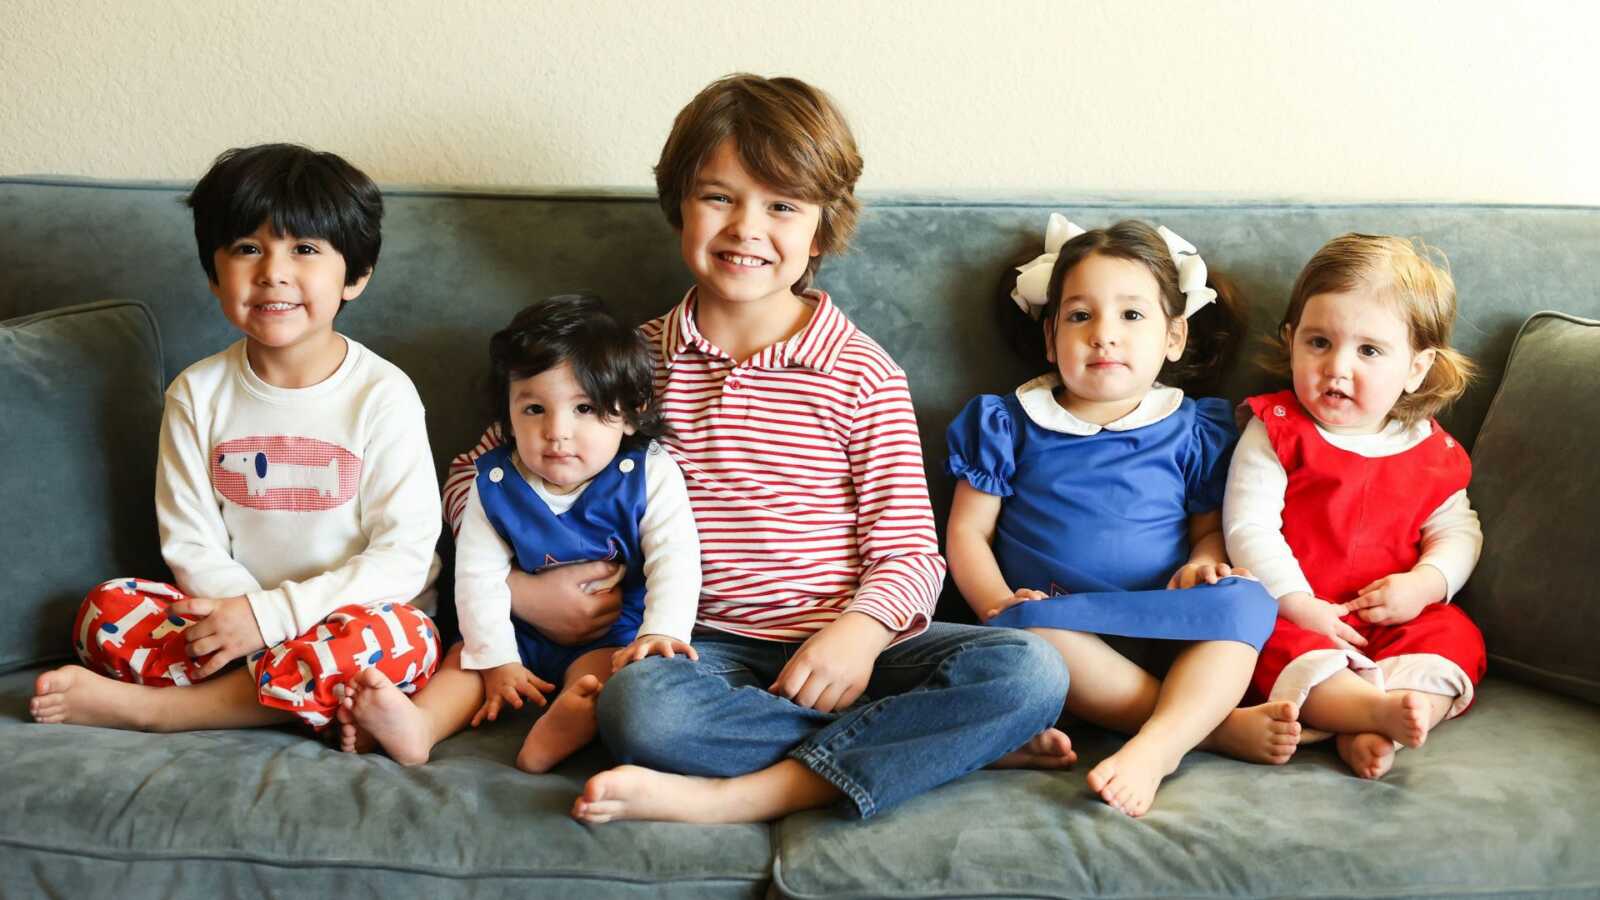 group of siblings through adoption on couch